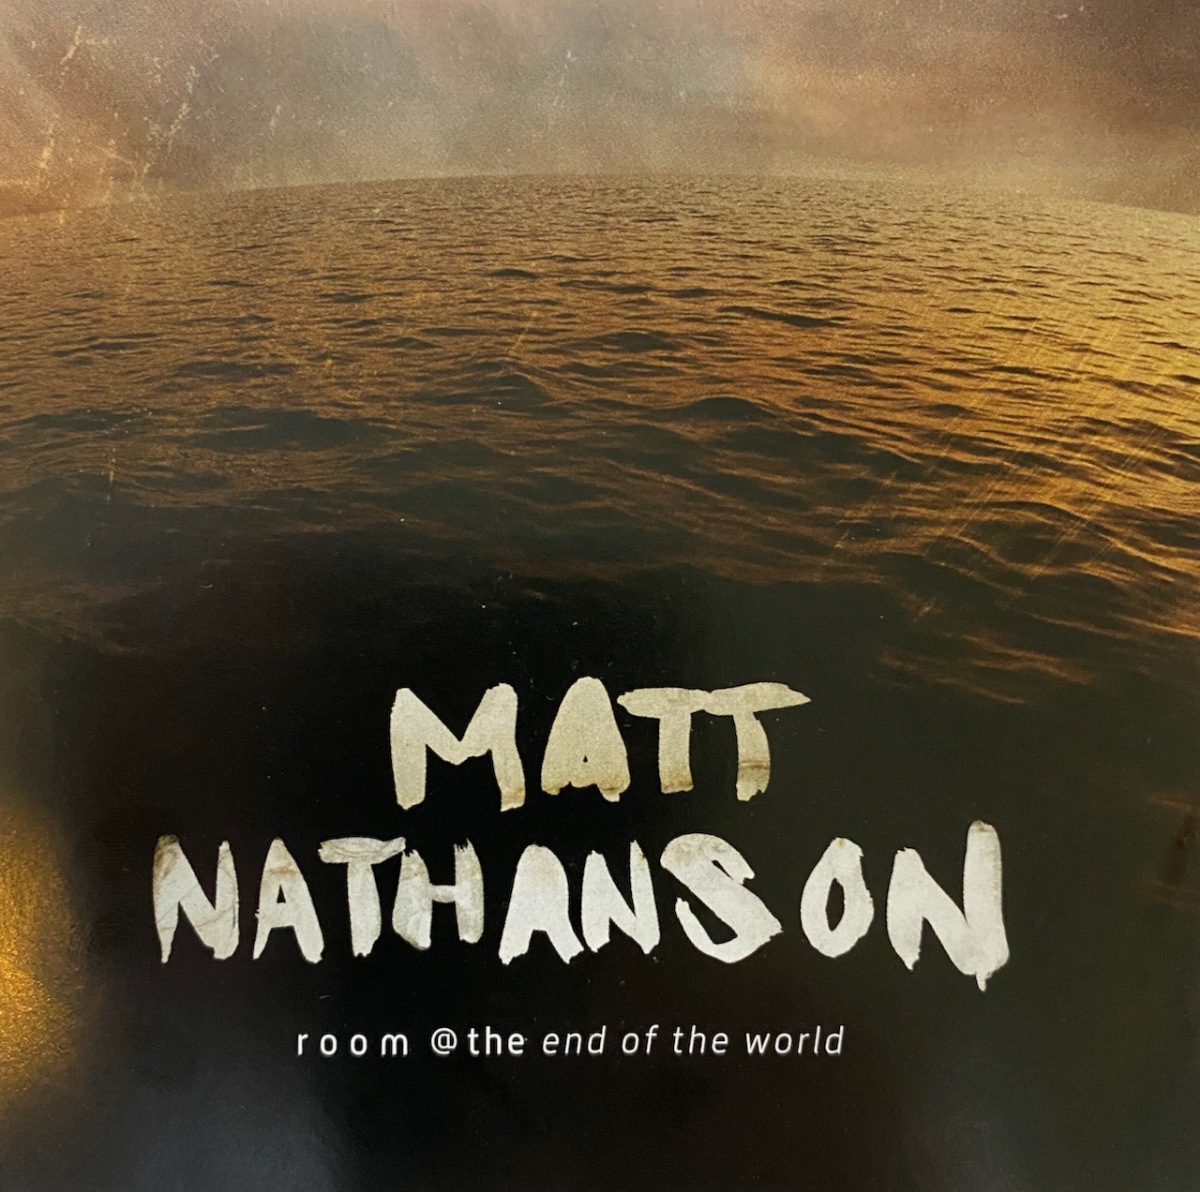 Matt Nathanson – “Room @ the End of the World” – CD Promotional Single – 2 Loud 2 Old Music